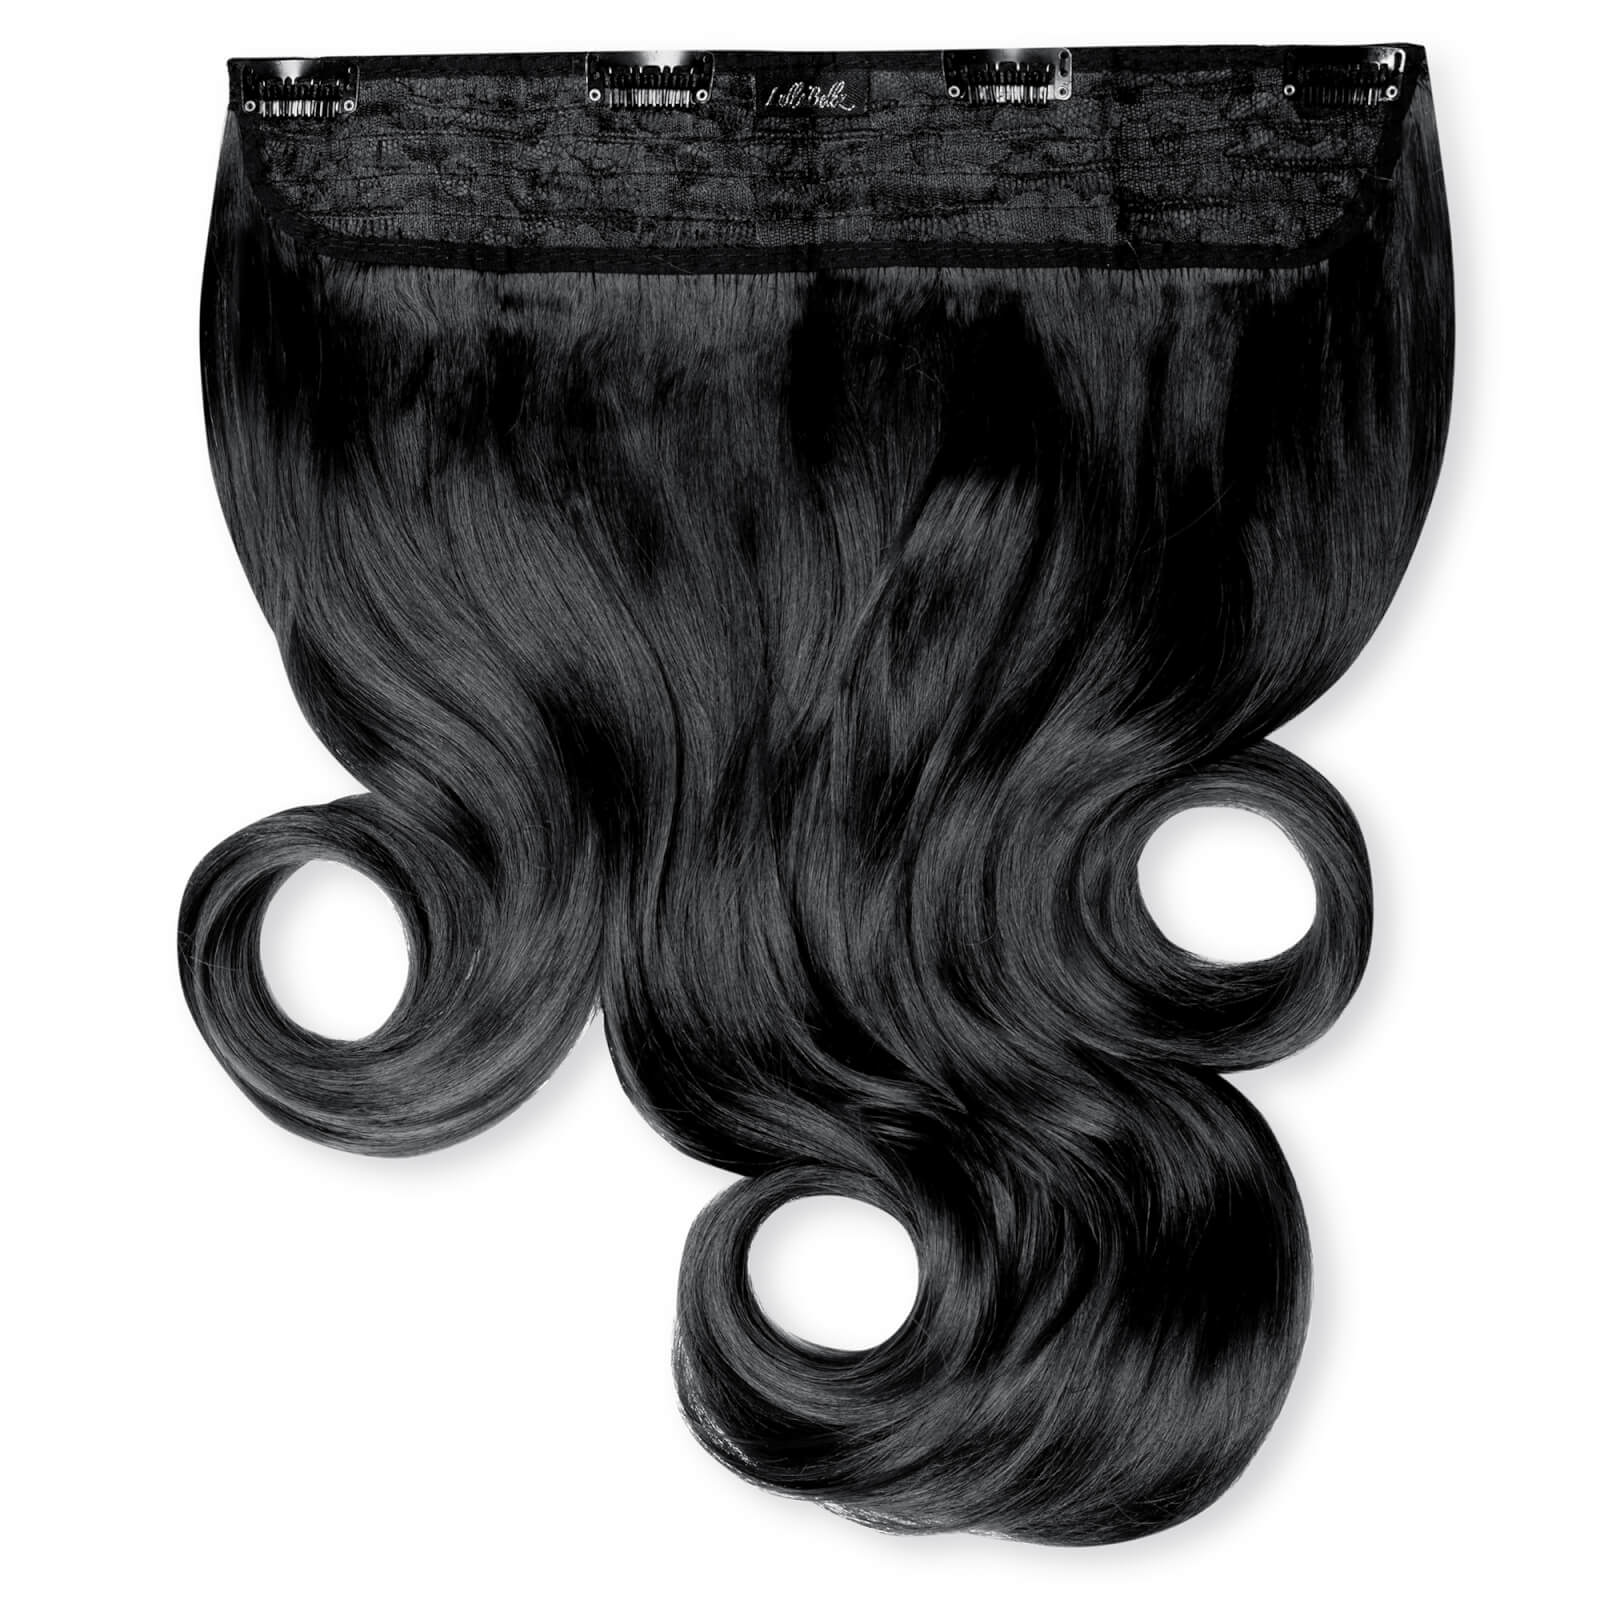 LullaBellz Thick 16 1-Piece Curly Clip in Hair Extensions (Various Colours) - Jet Black